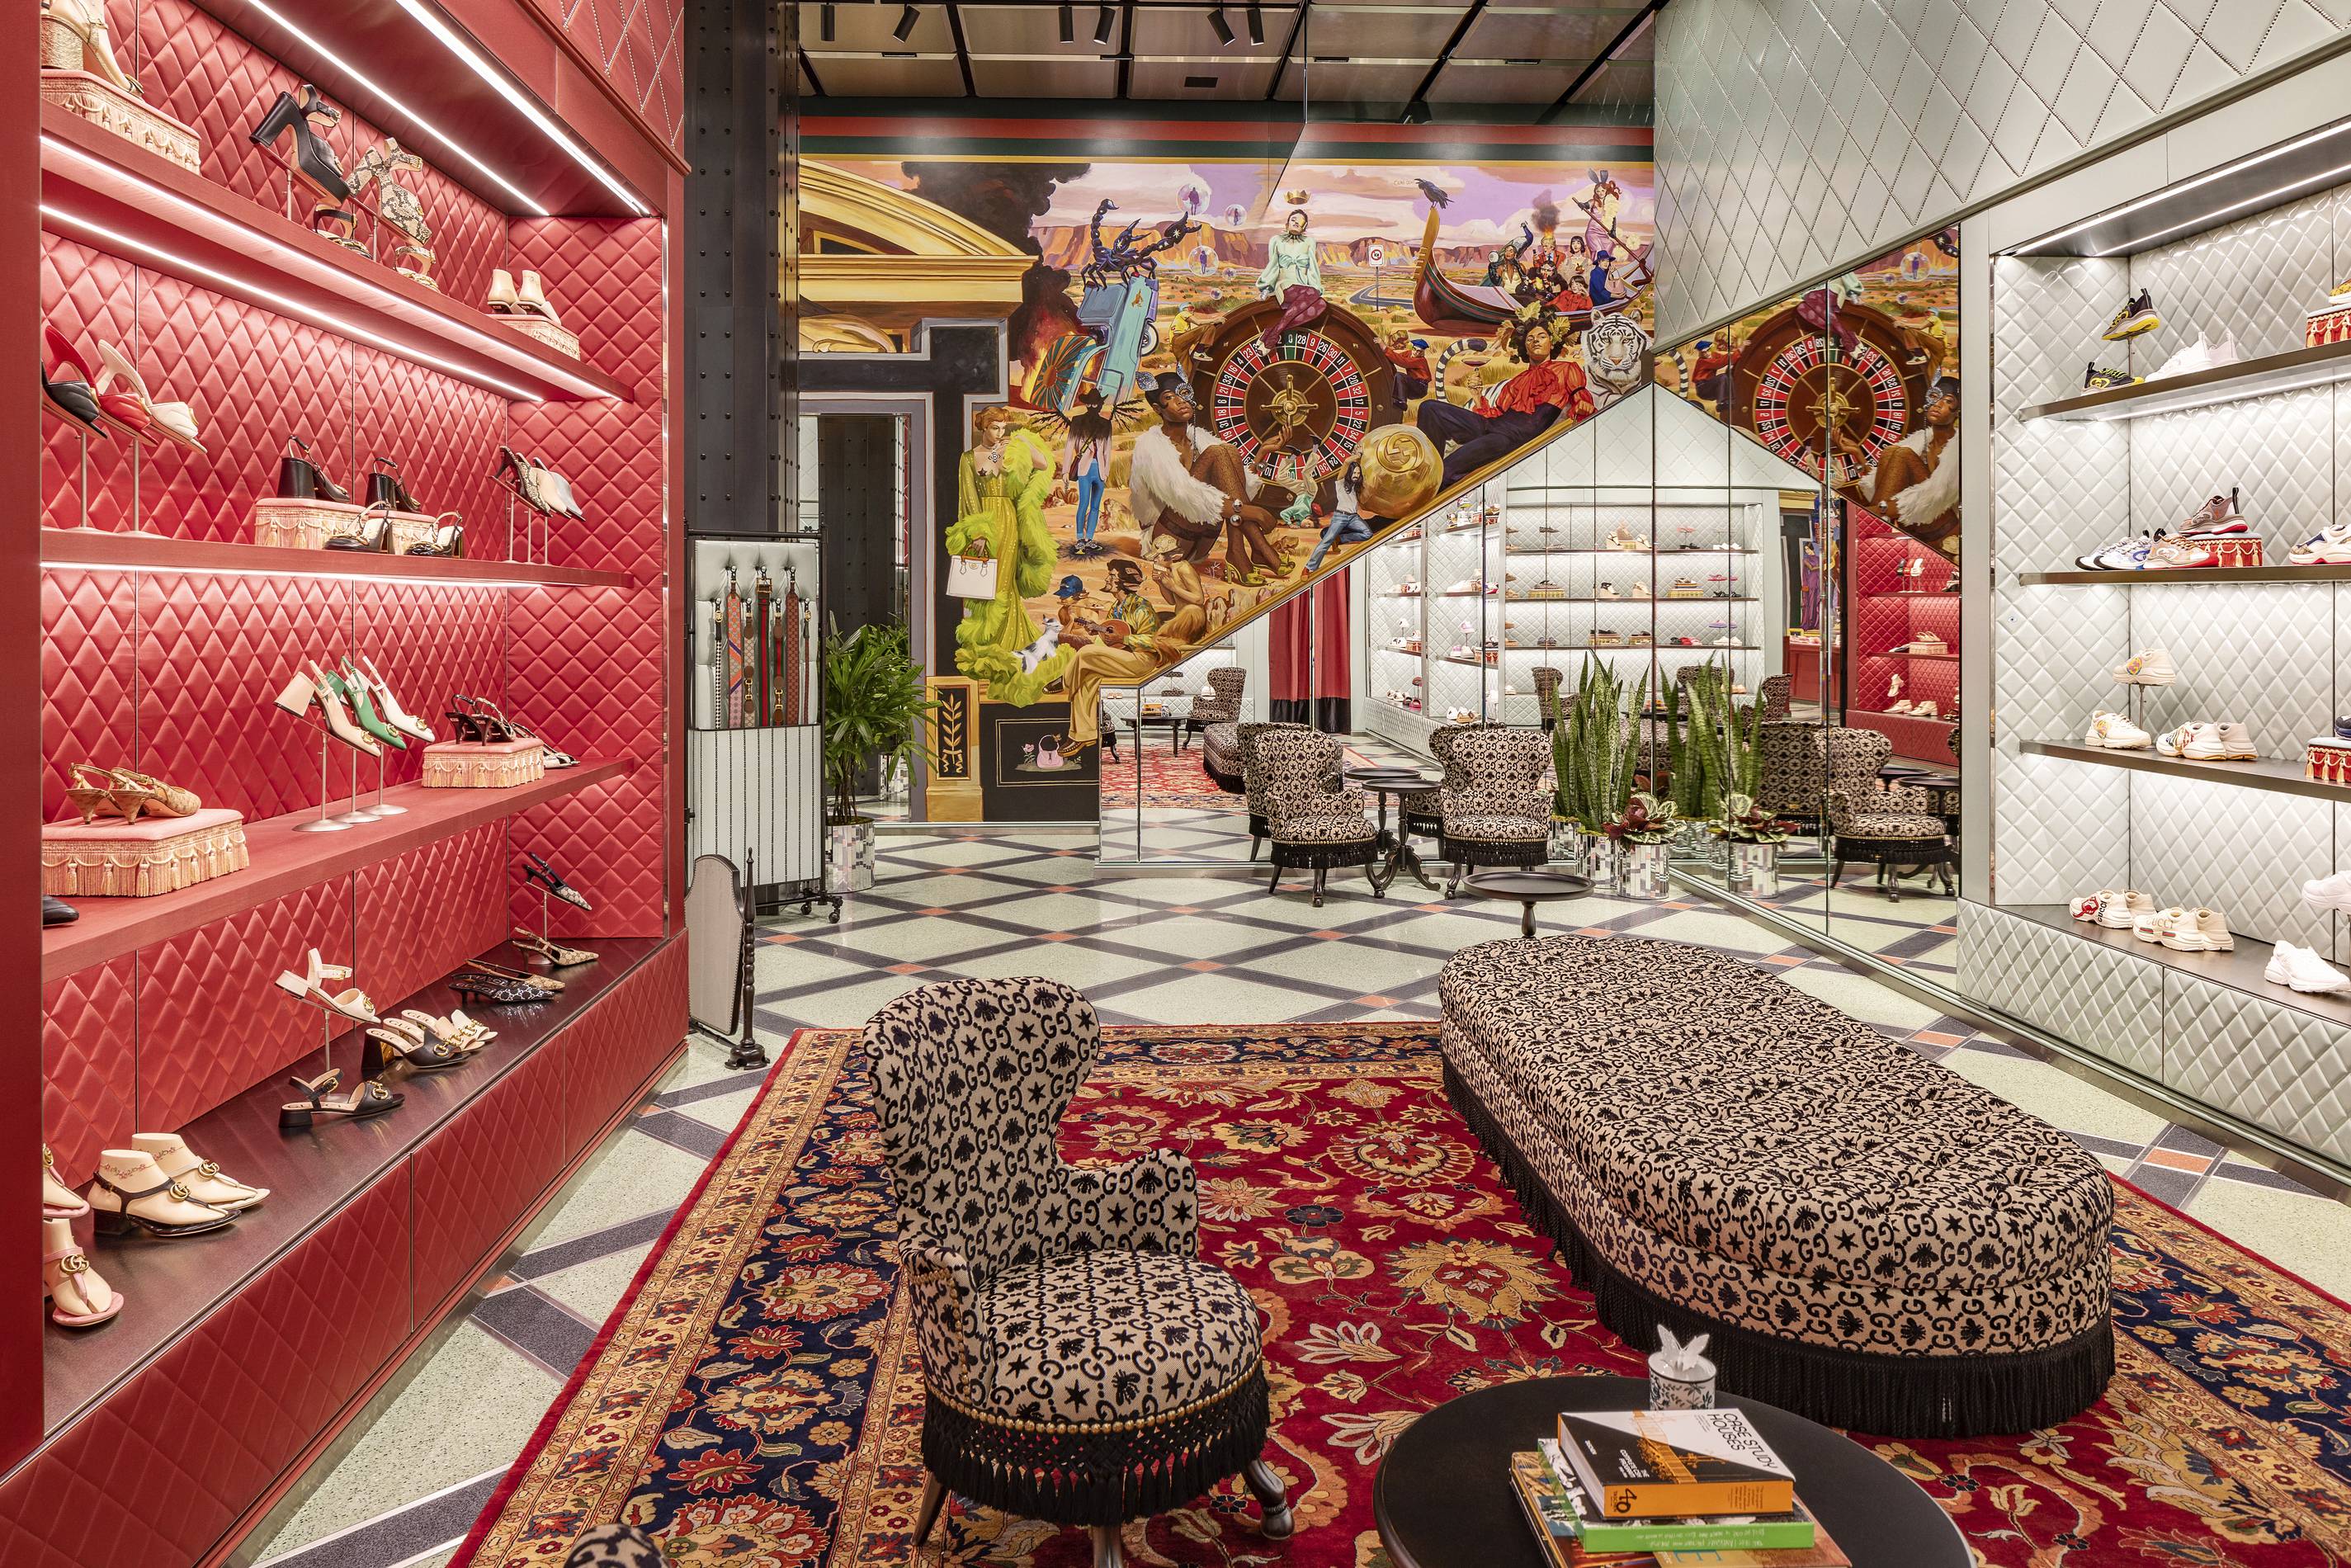 Step Inside The New Gucci Boutique At The Shops At Crystals